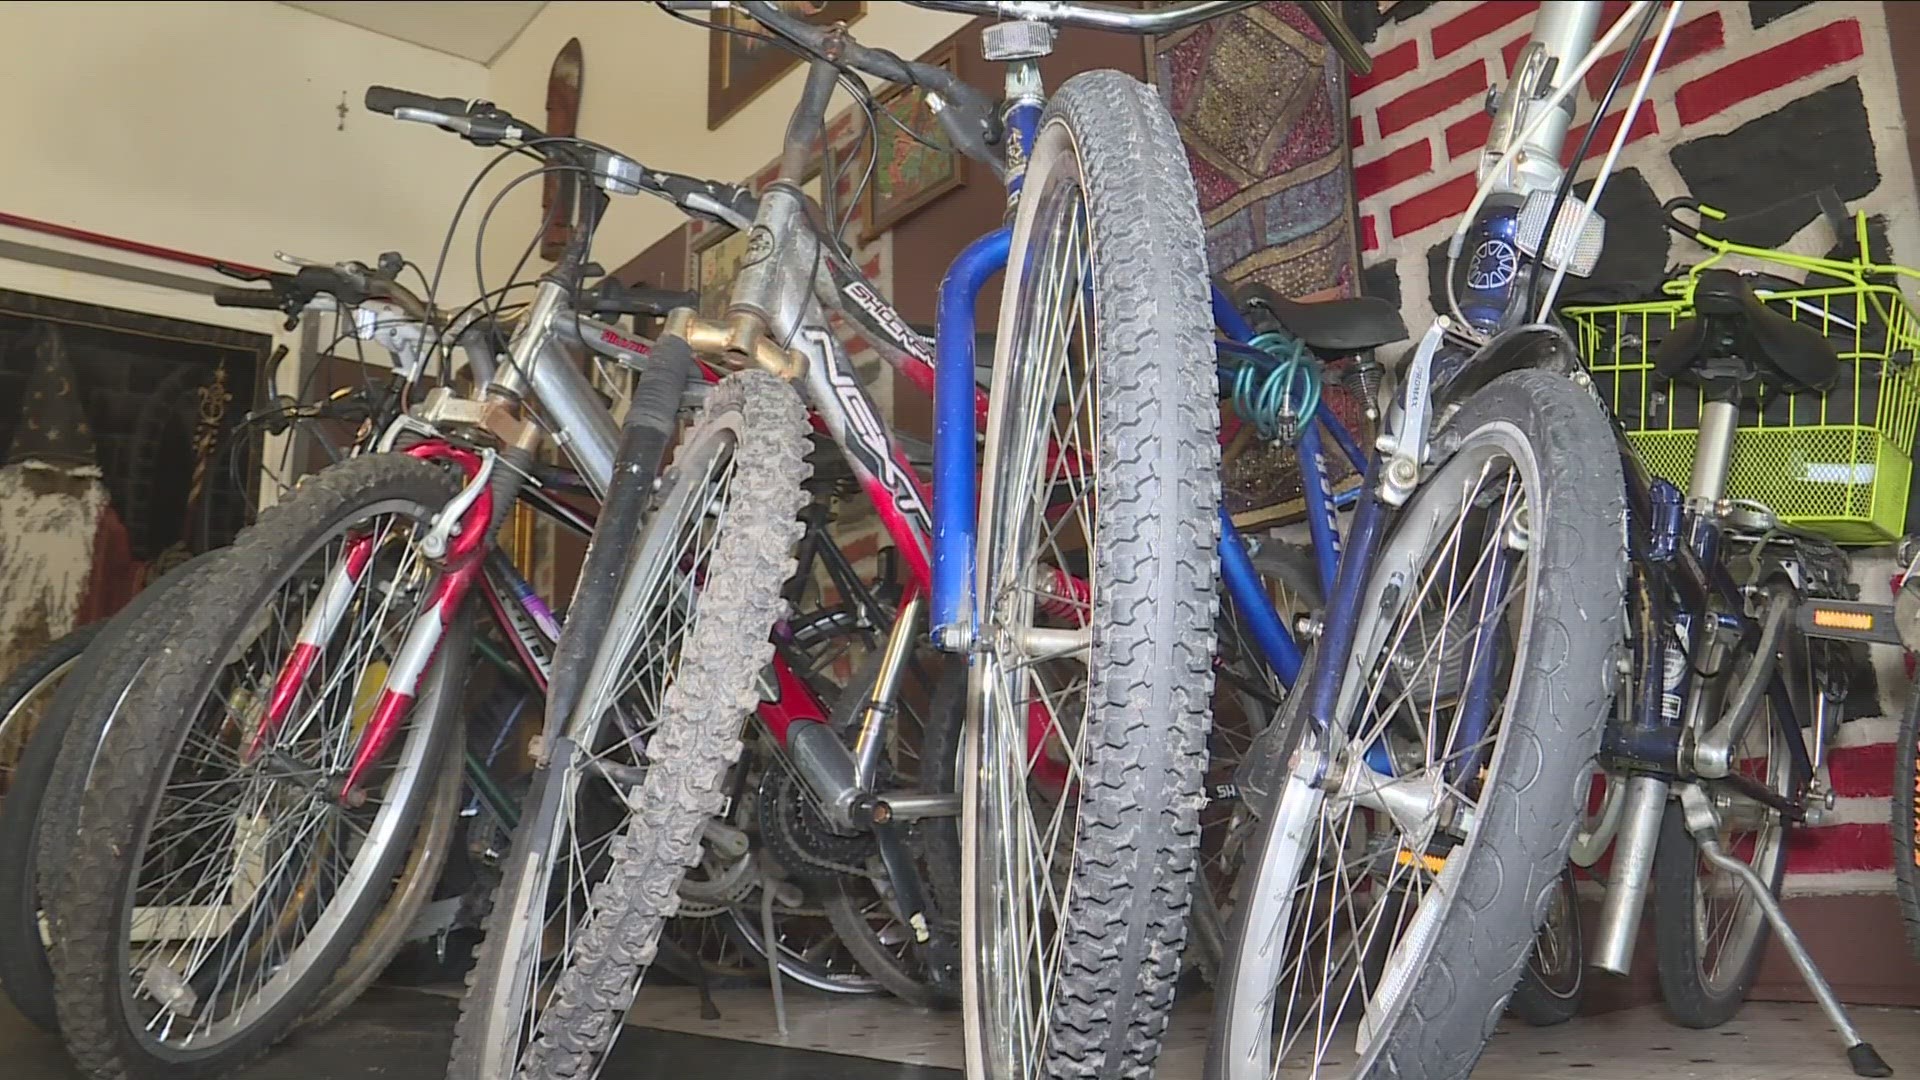 The shop is called Holistic Cycles, and it also has a free mobility bank for those who can't afford a means of transportation.